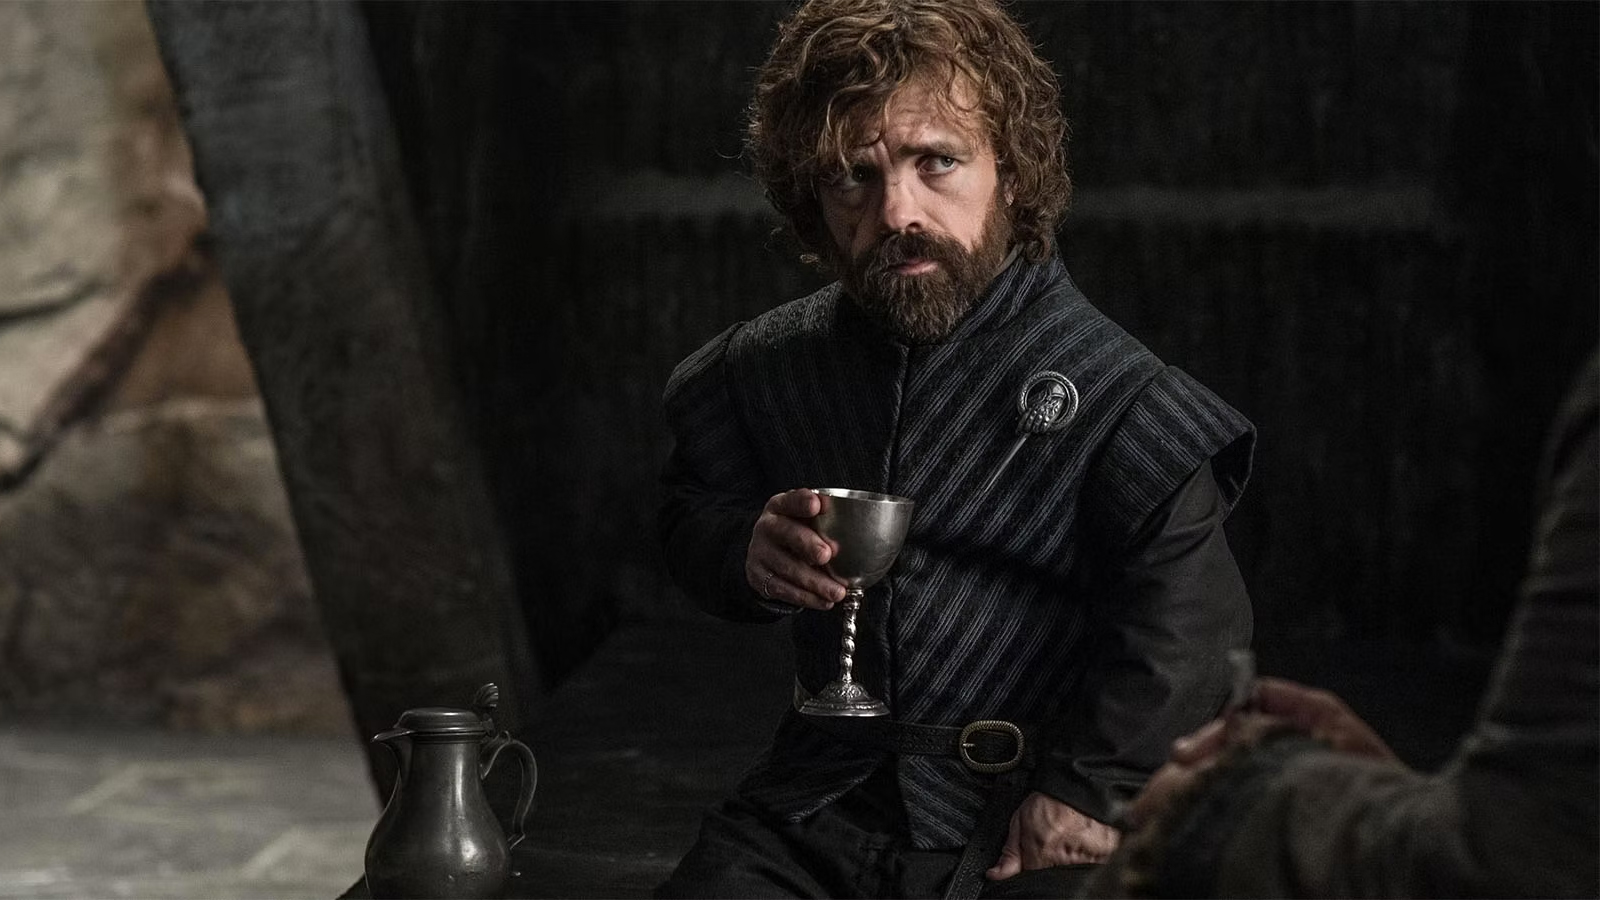 Tyrion Lannister’s Wittiest Lines From ‘Game Of Thrones’